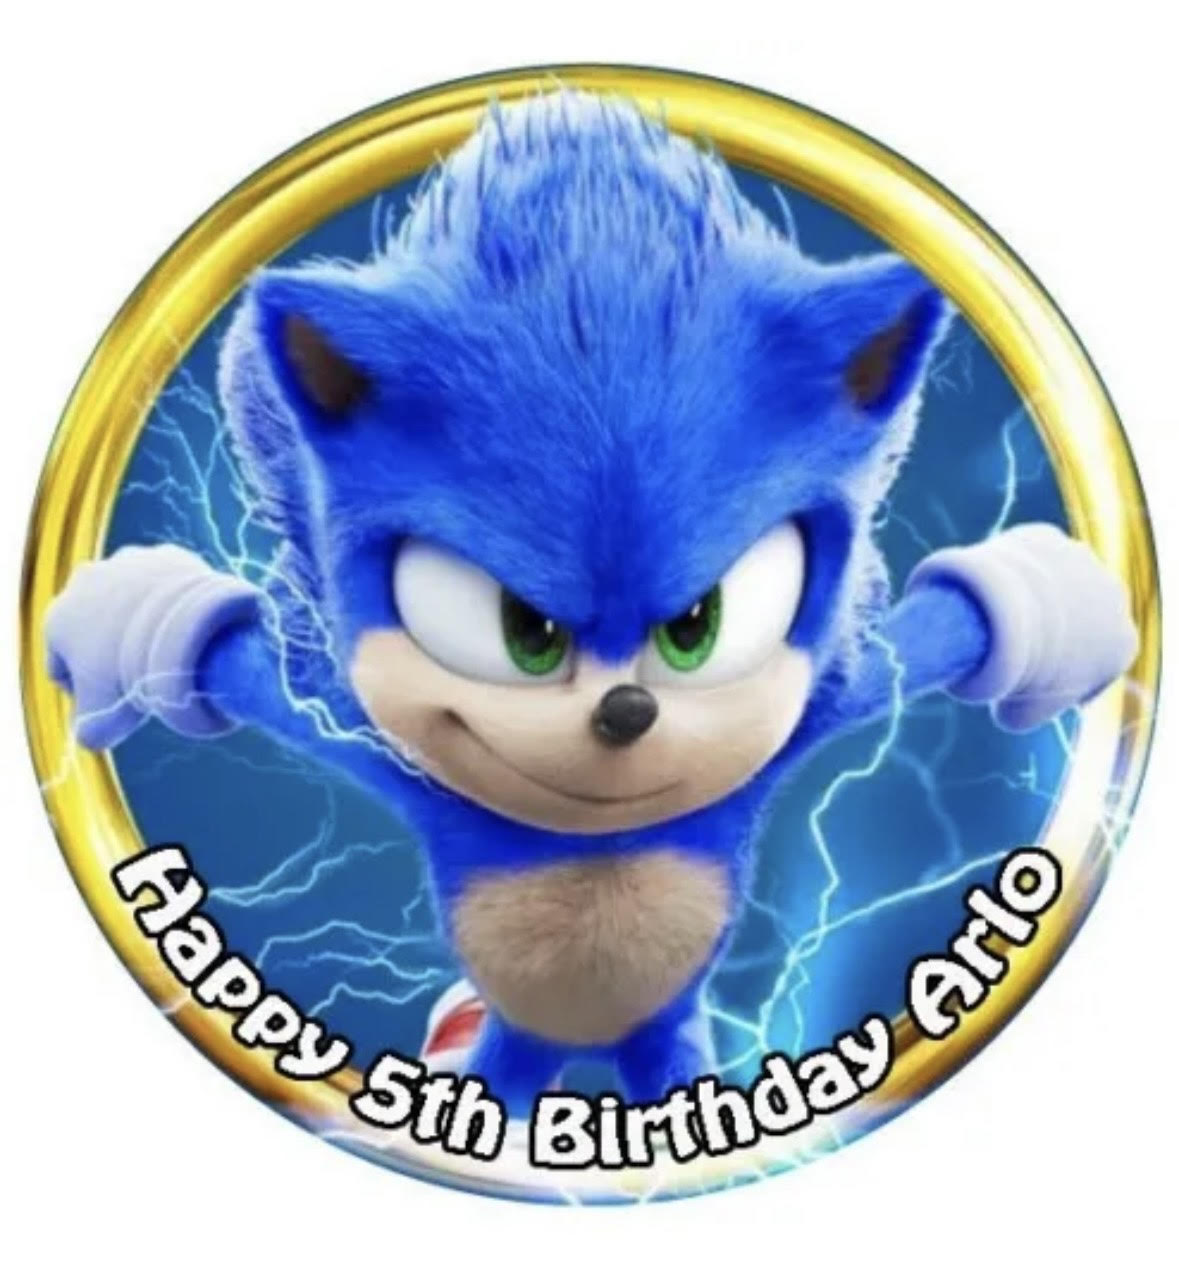 Sonic The Hedgehog #3 Round Cake Edible Icing Image Topper 19cm